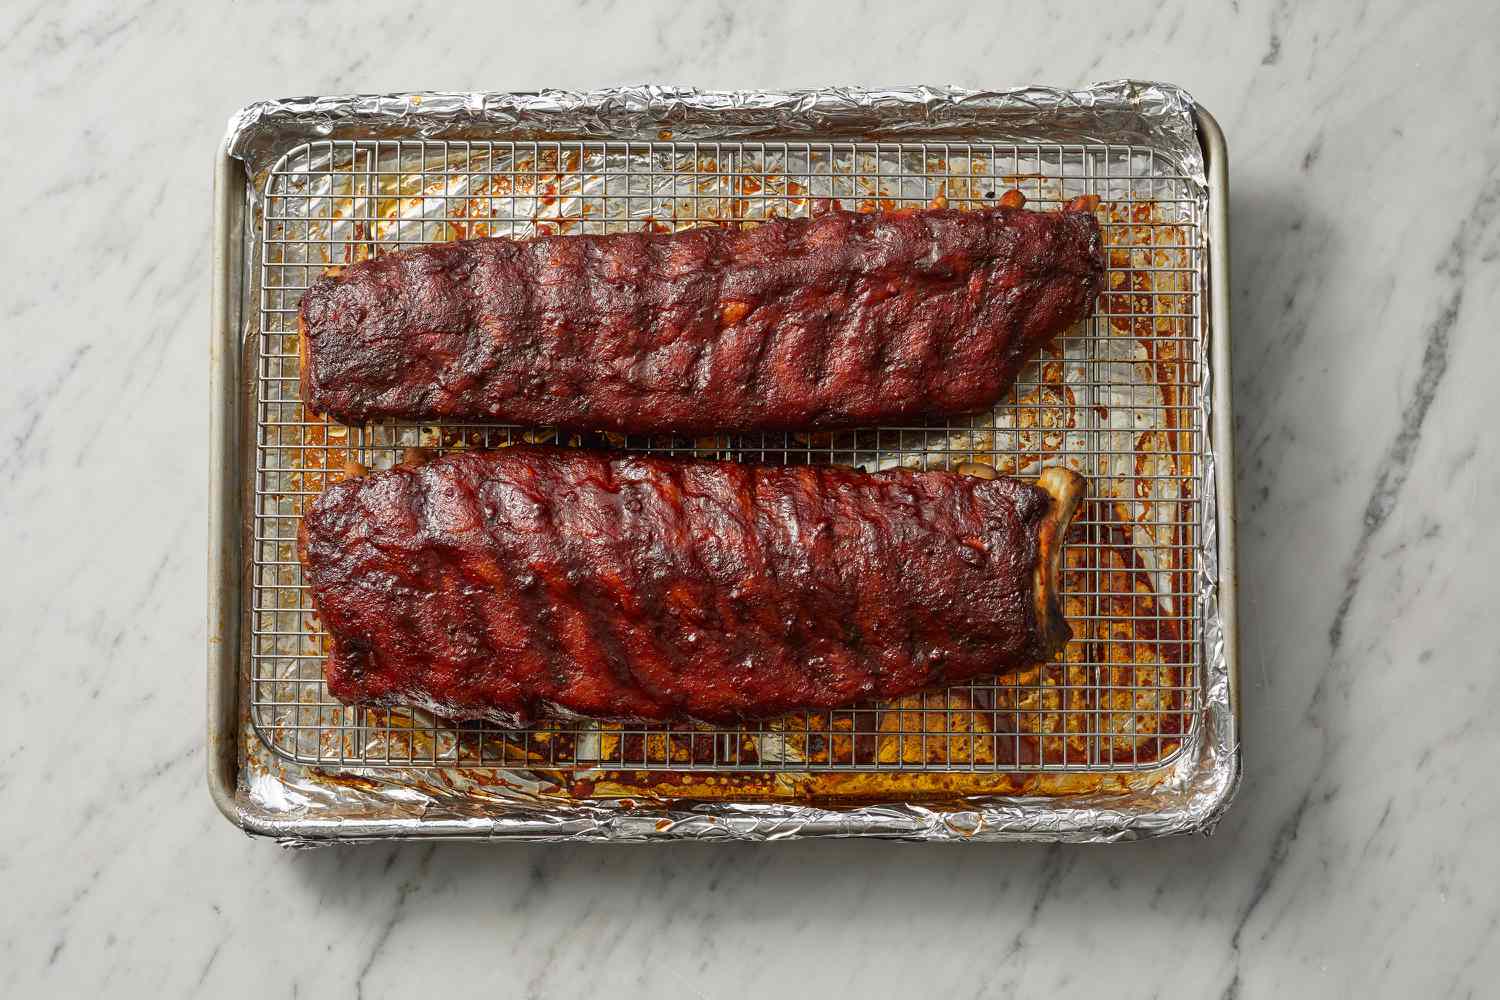 Once cooked, you can transfer the ribs to a baking sheet and broil them in the oven for a few minutes.